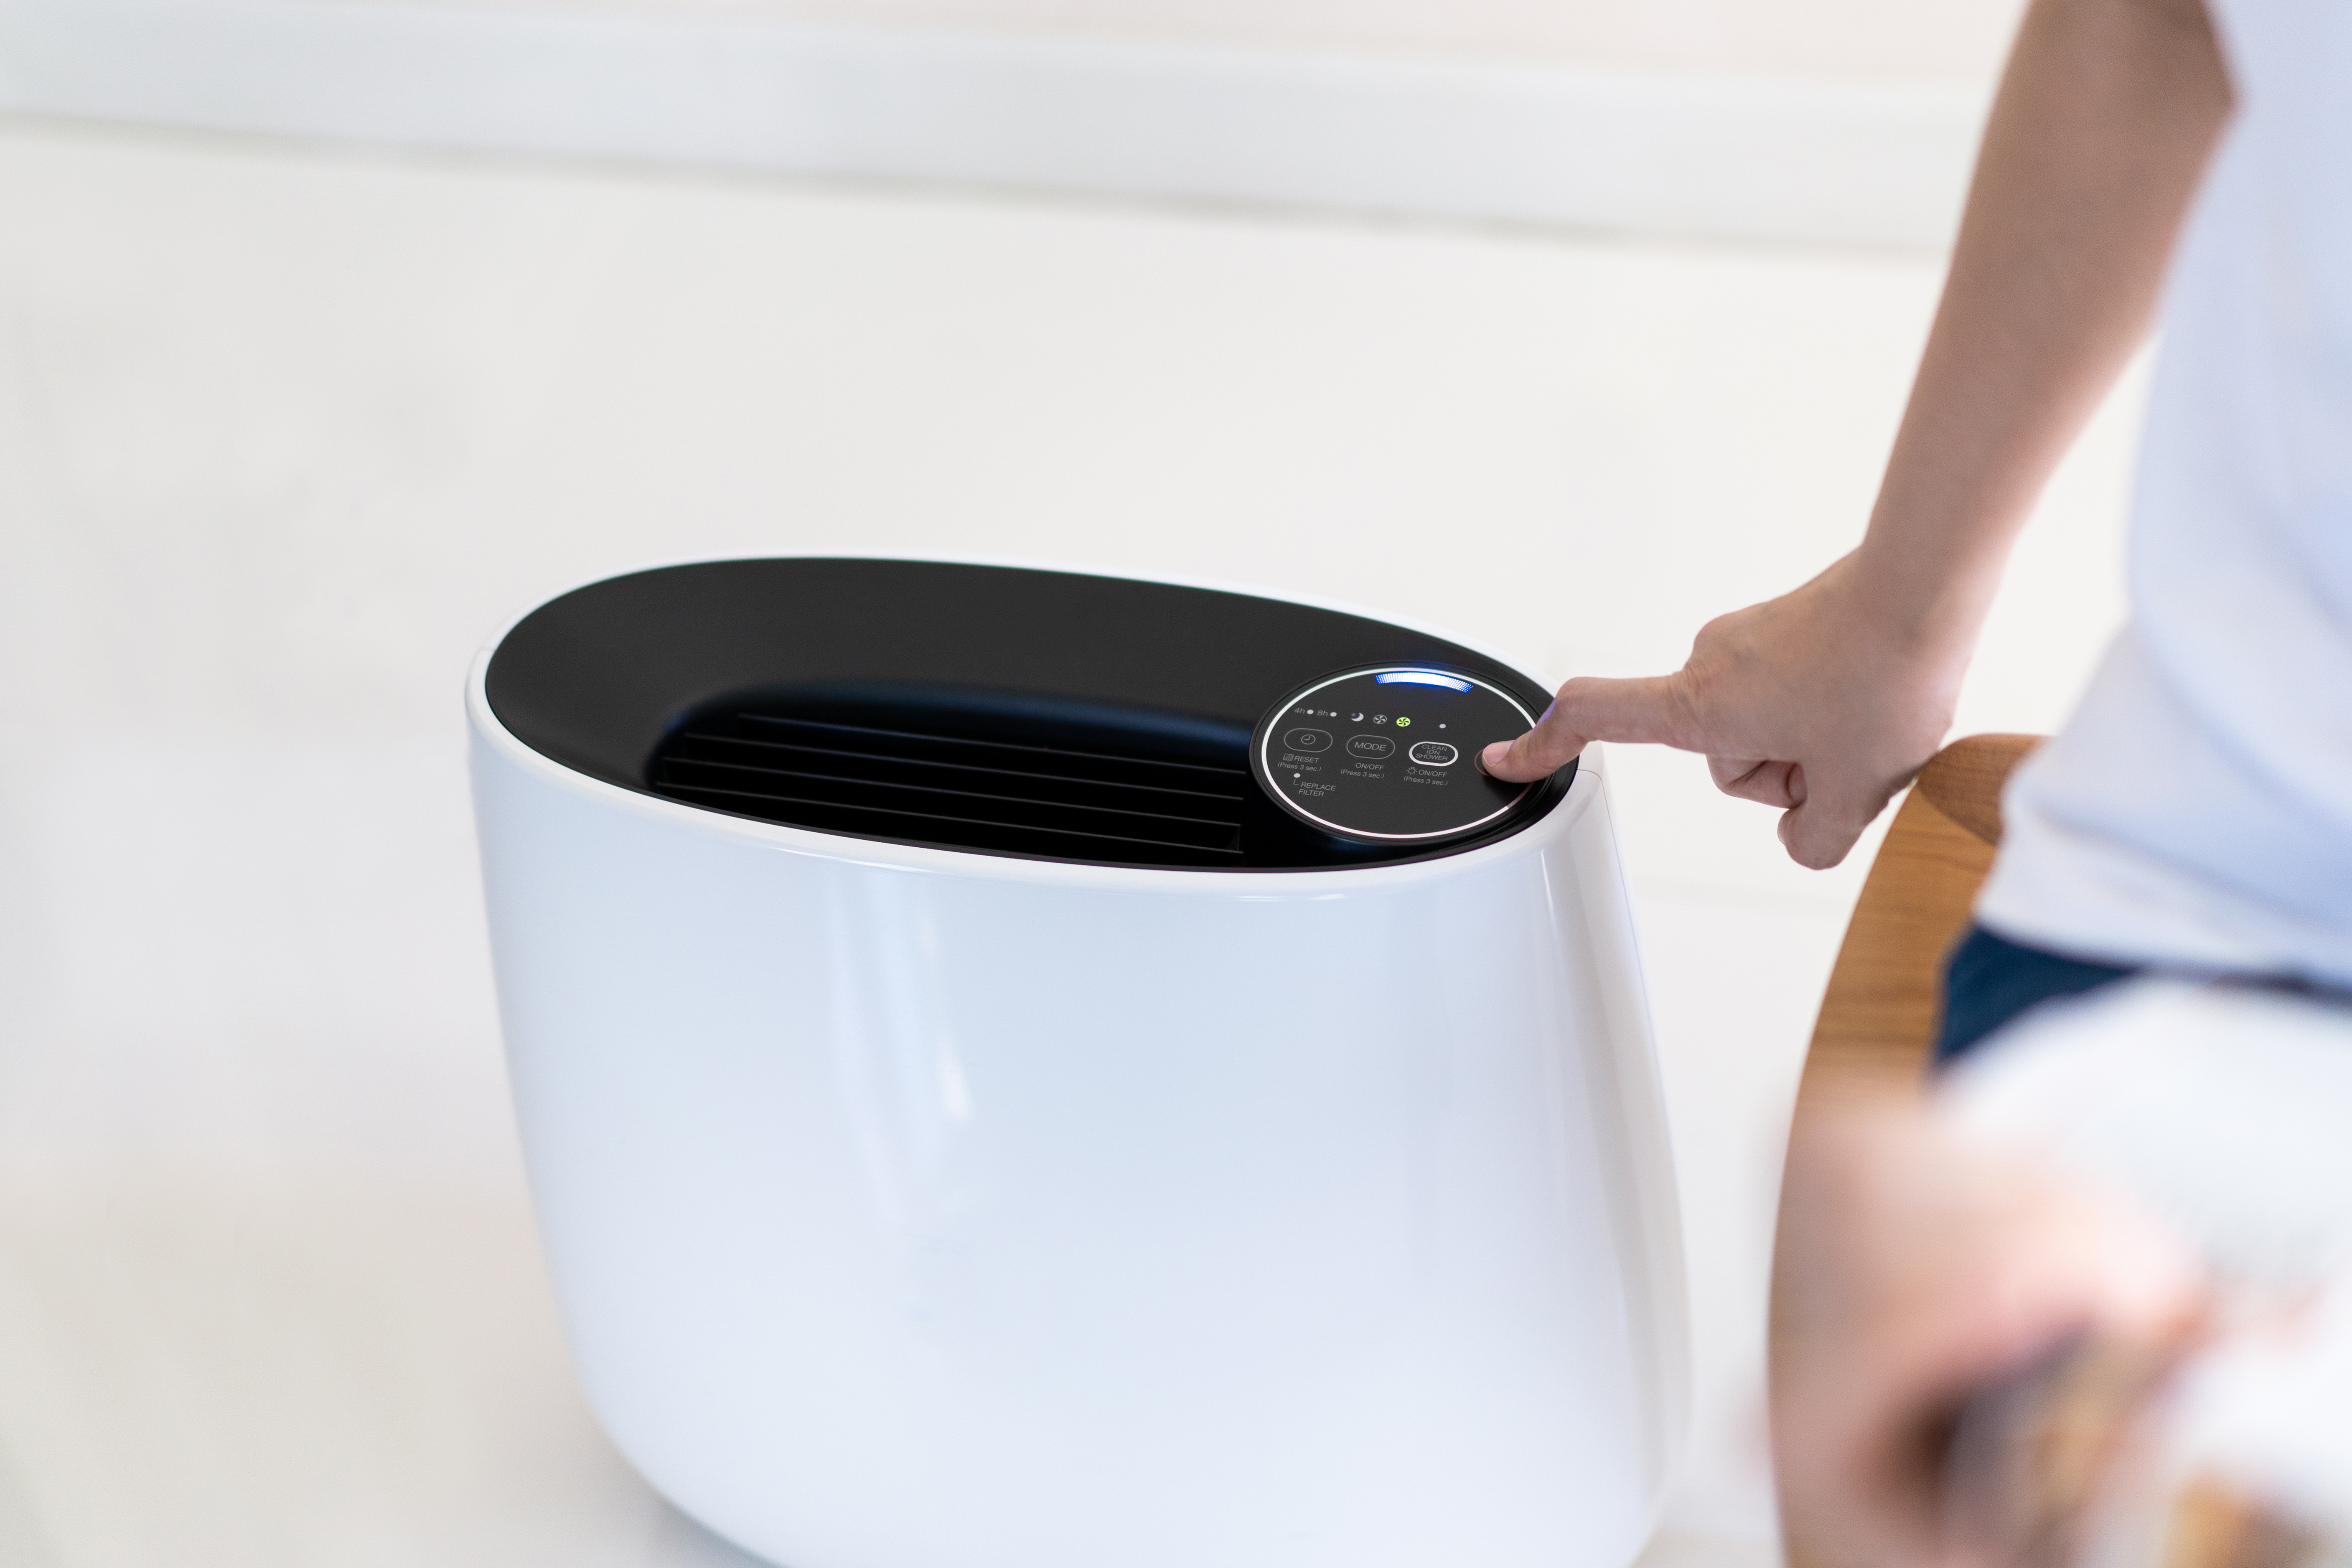 A sleek portable air conditioner with digital controls.